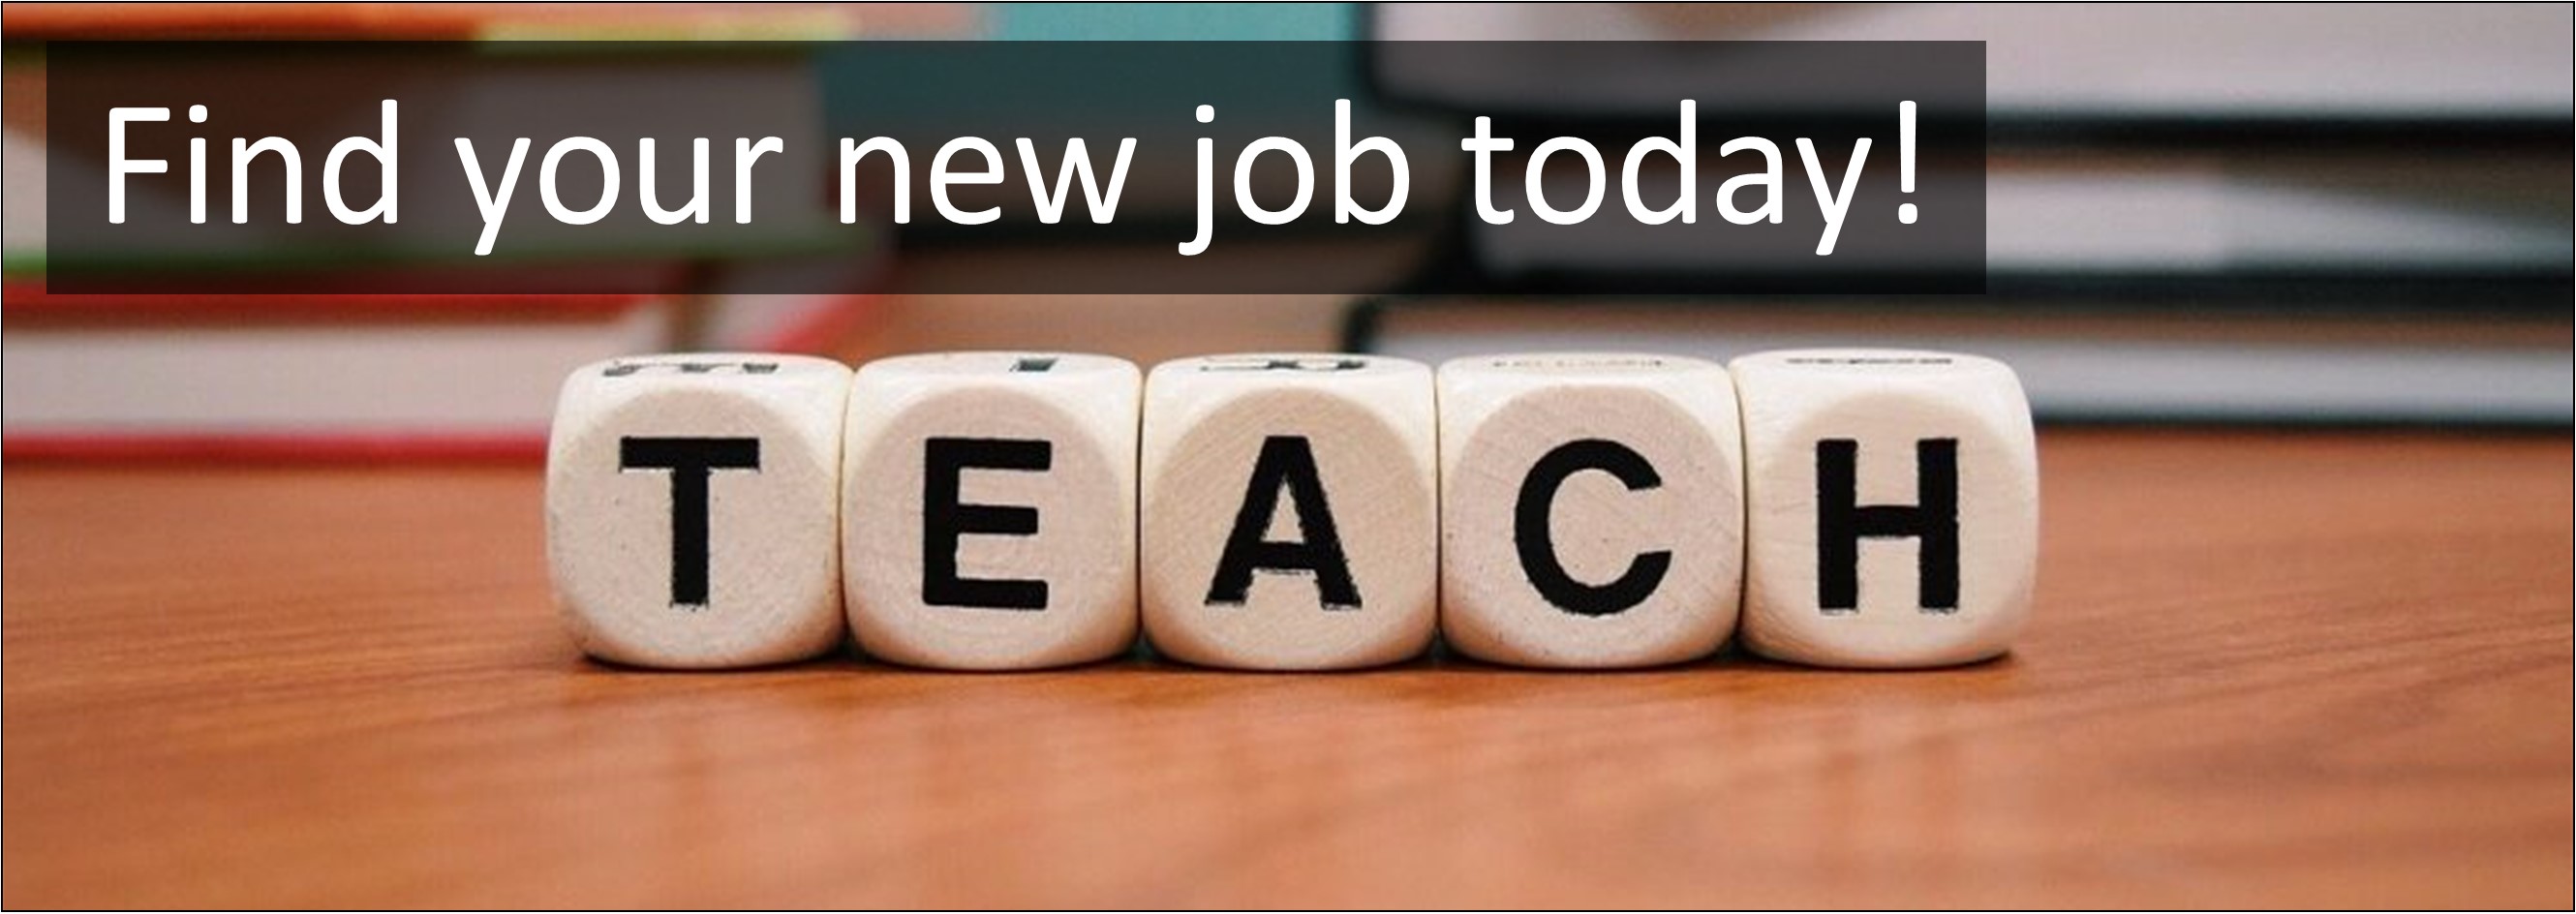 Teaching & Education Jobs. Learning Support Assistant / Teaching Assistant Jobs, Careers & Vacancies in Waterlooville, Hampshire Advertised by AWD online – Multi-Job Board Advertising and CV Sourcing Recruitment Services